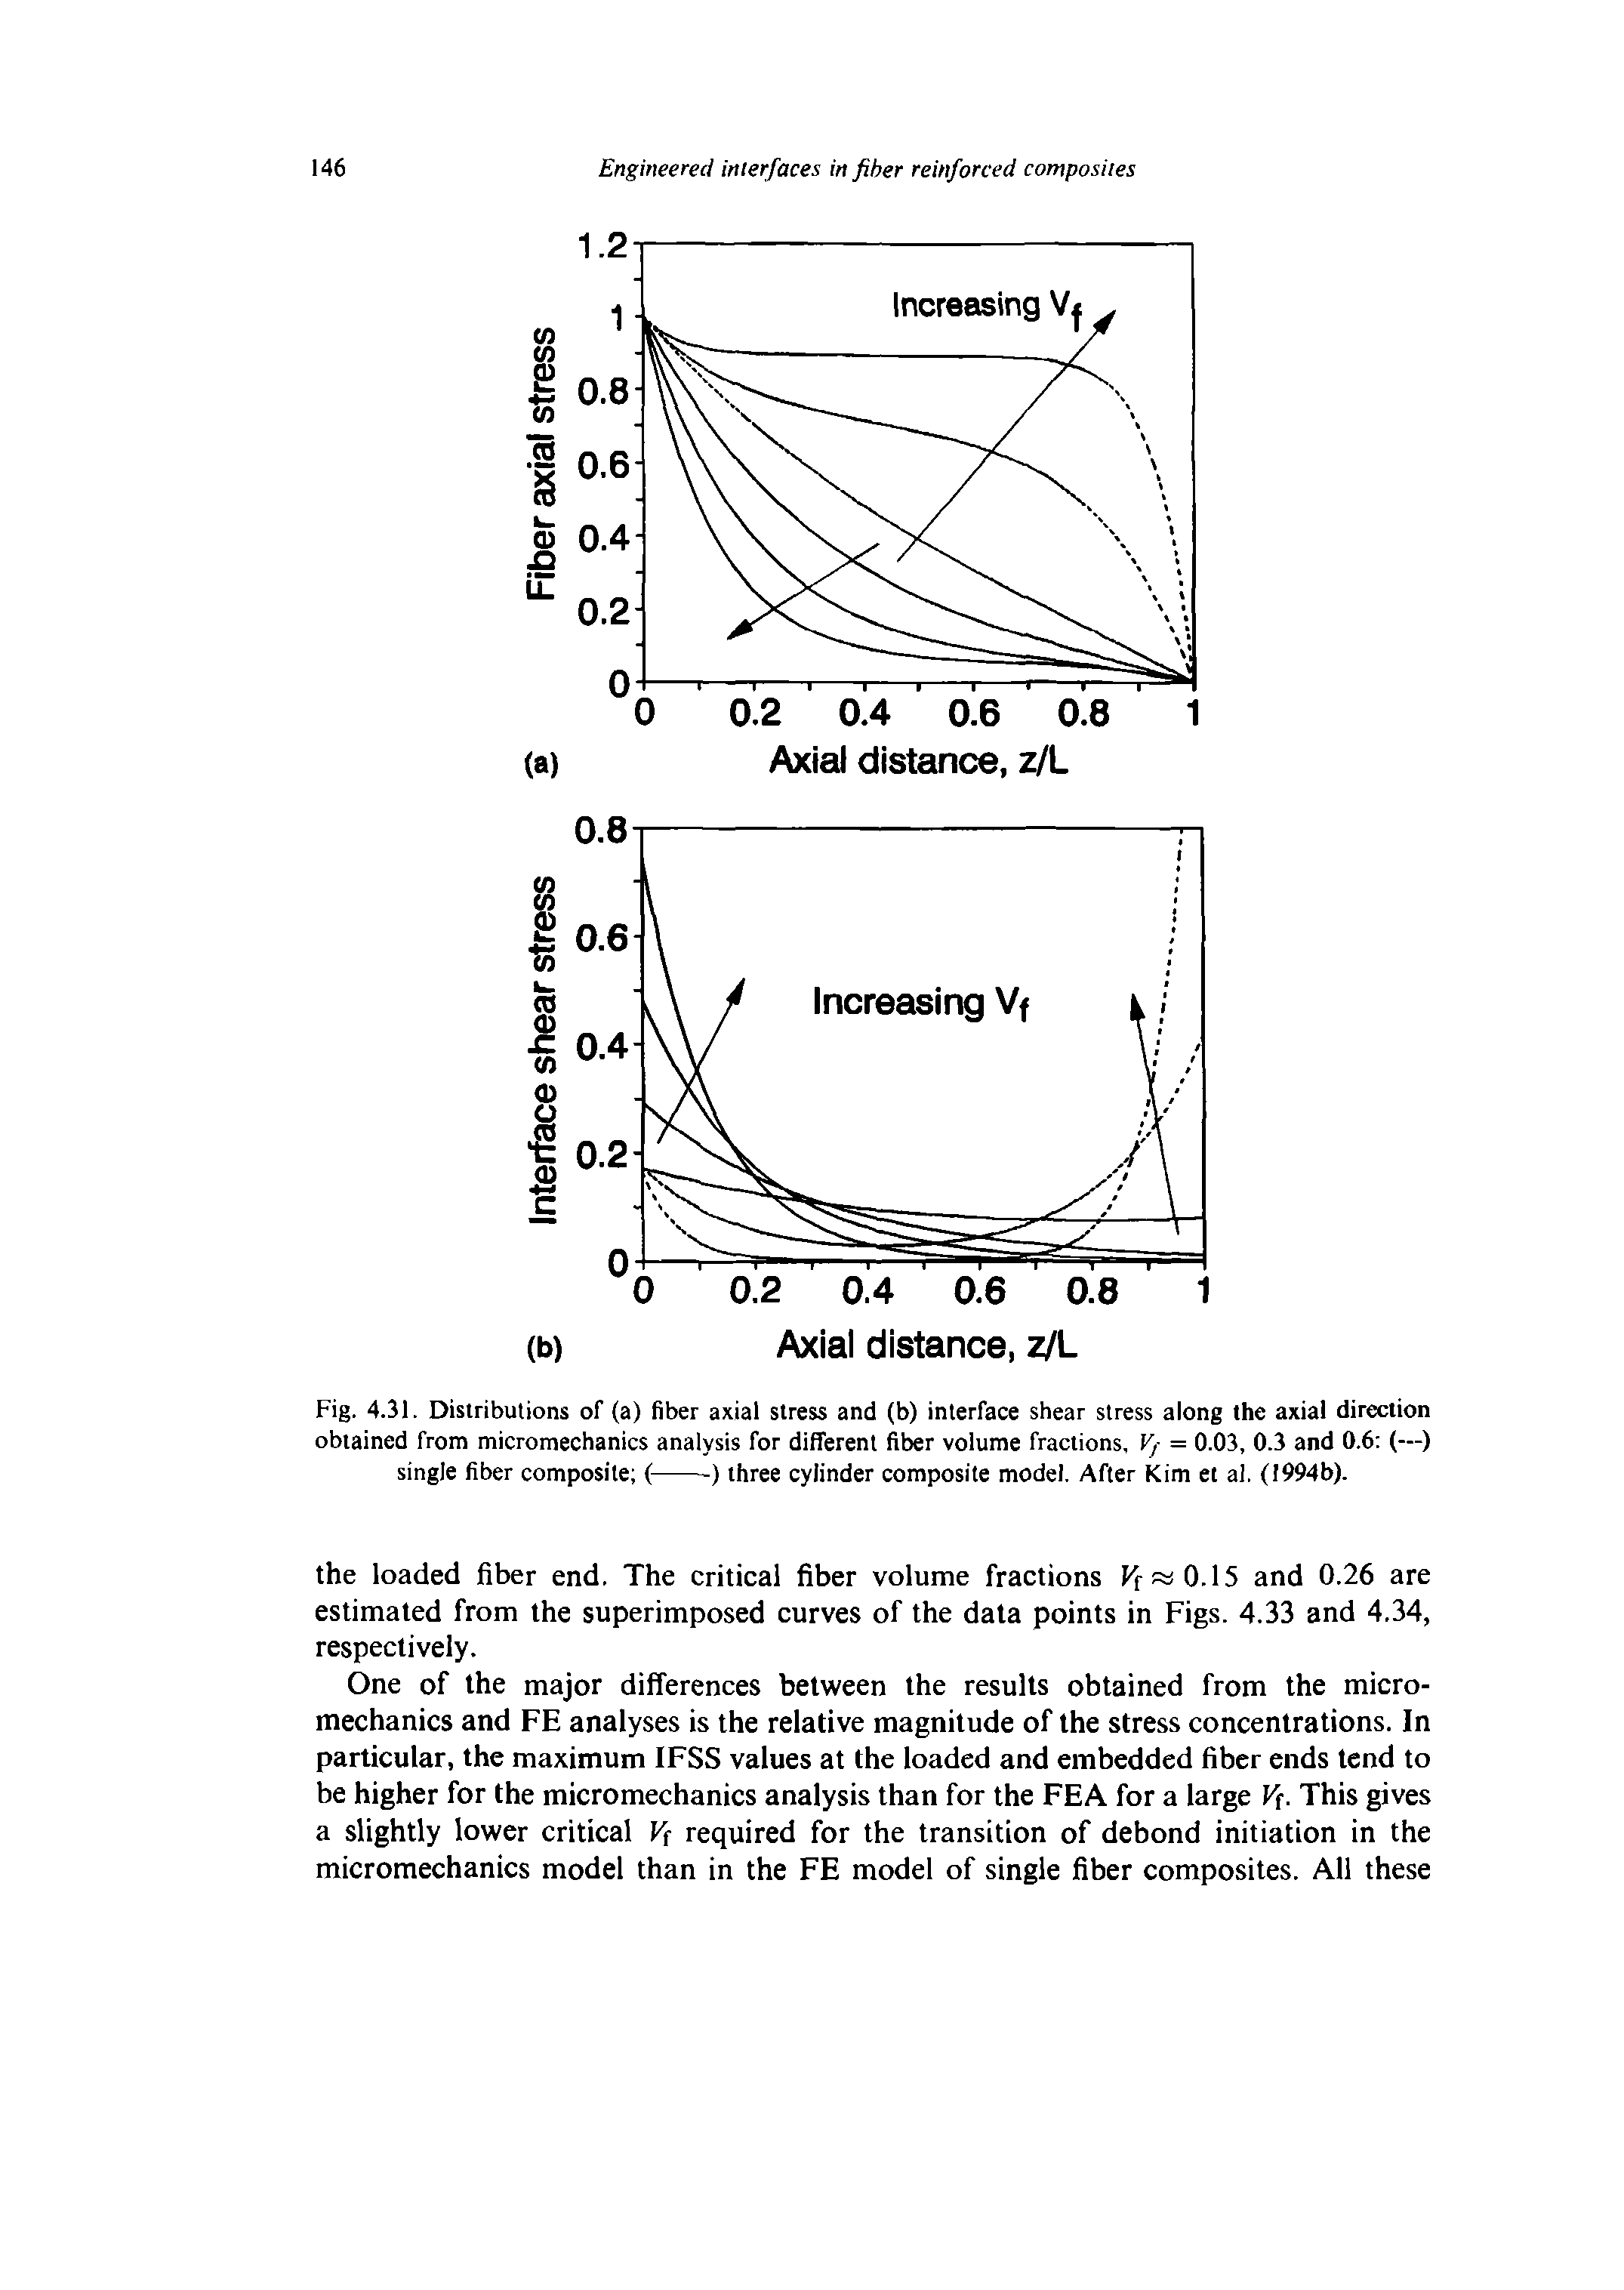 Fig. 4.31. Distributions of (a) fiber axial stress and (b) interface shear stress along the axial direction obtained from micromechanics analysis for different fiber volume fractions, Vf = 0.03, 0.3 and 0.6 (—) single fiber composite (--------) three cylinder composite model. After Kim et al. (1994b).